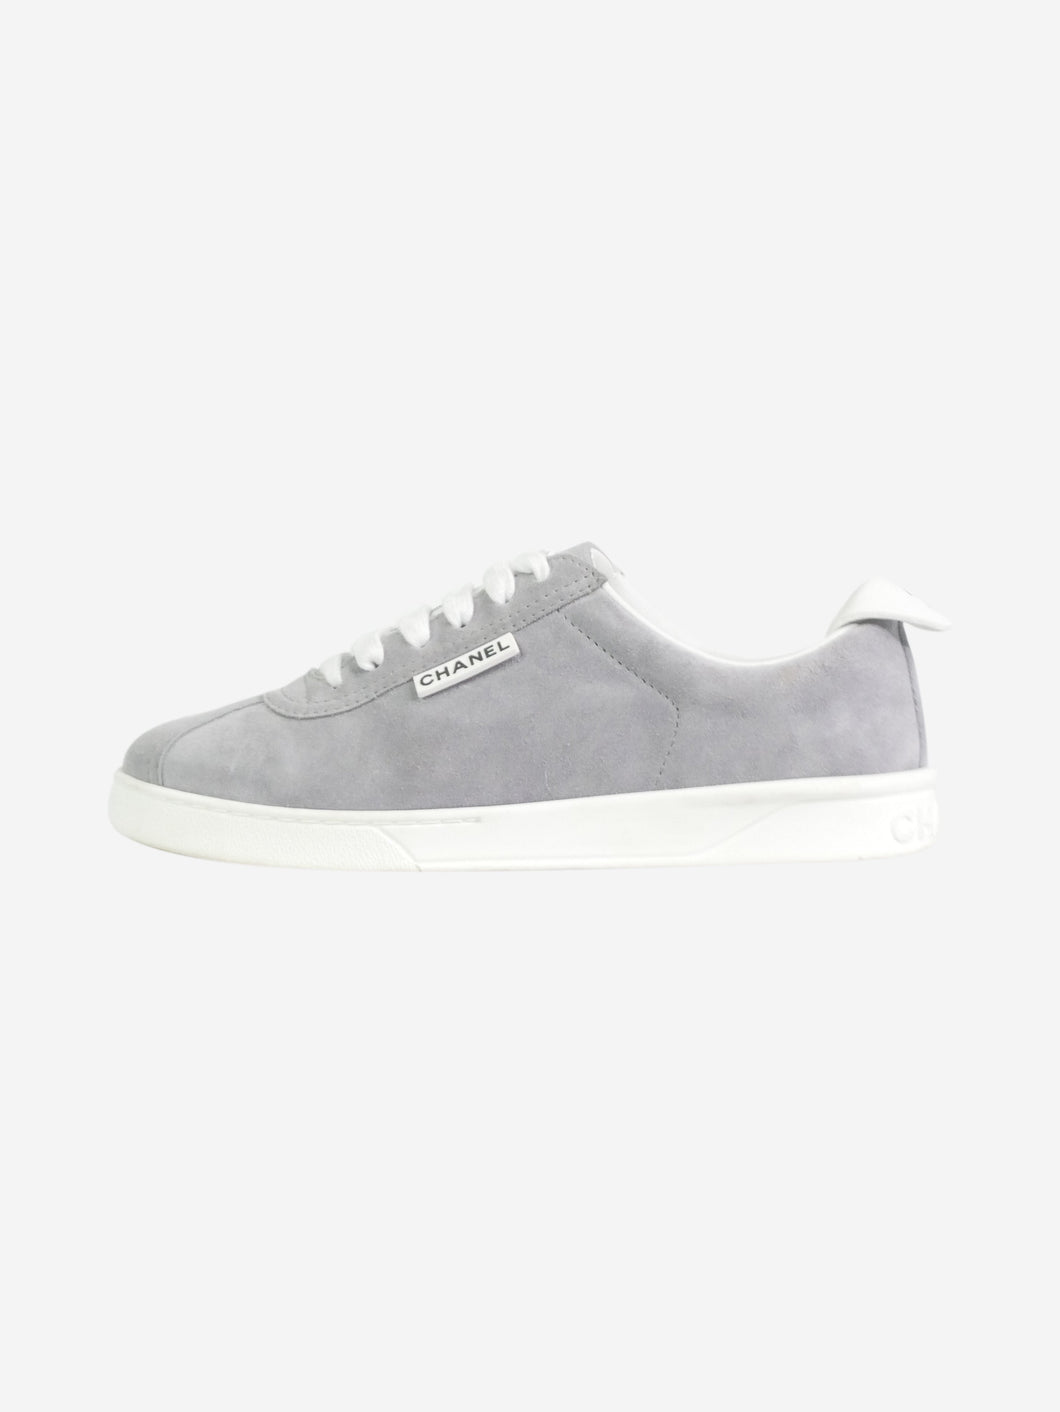 Grey lace up suede trainers with branded details - size EU 37.5 Trainers Chanel 